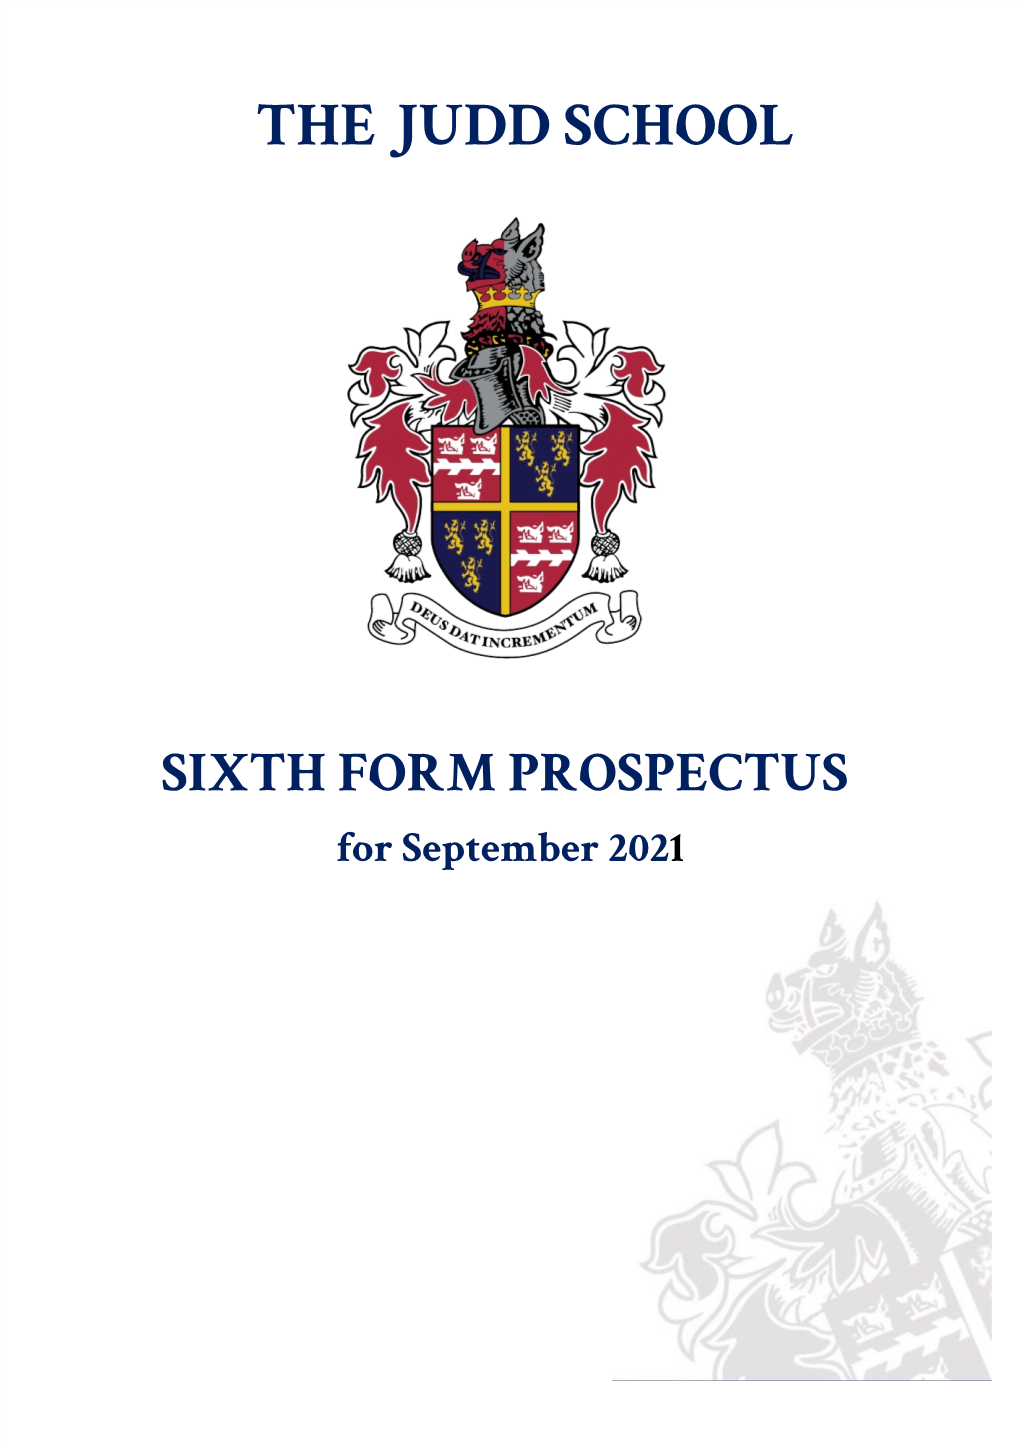 SIXTH FORM PROSPECTUS for September 2021​